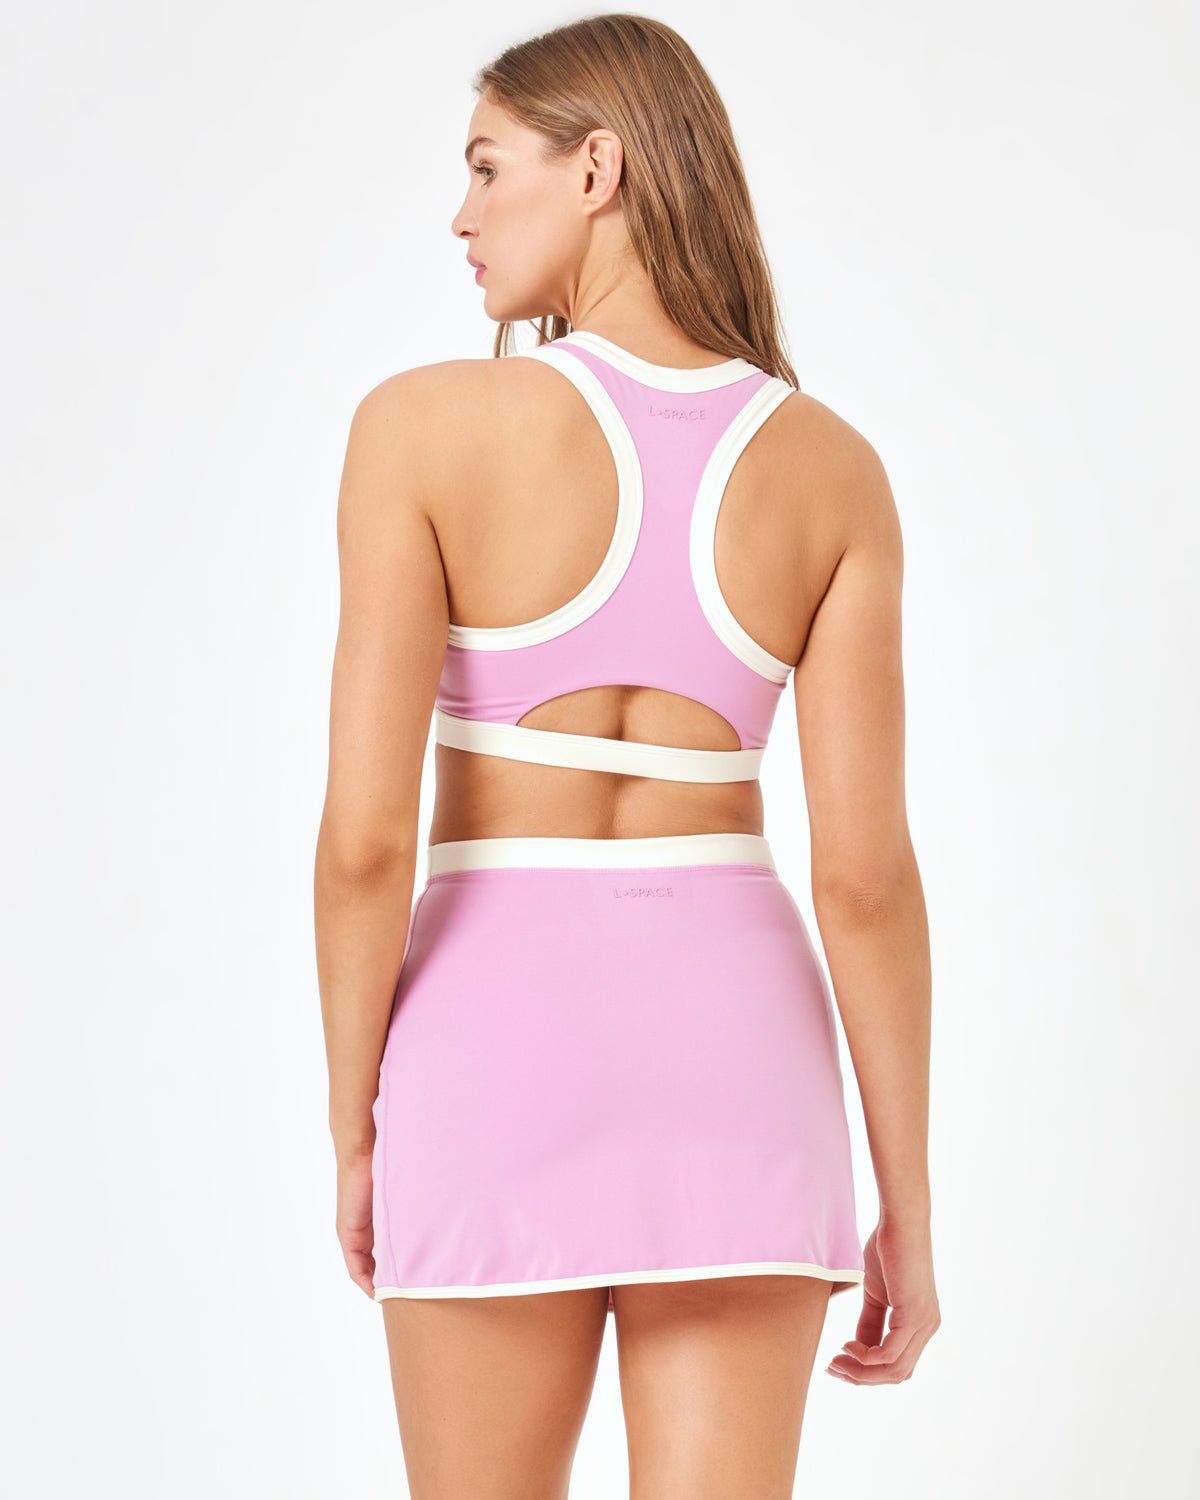 LSPACE X Anthropologie Campbell Skort - Pink Lady Pink Lady | Model: Anna (size: S)